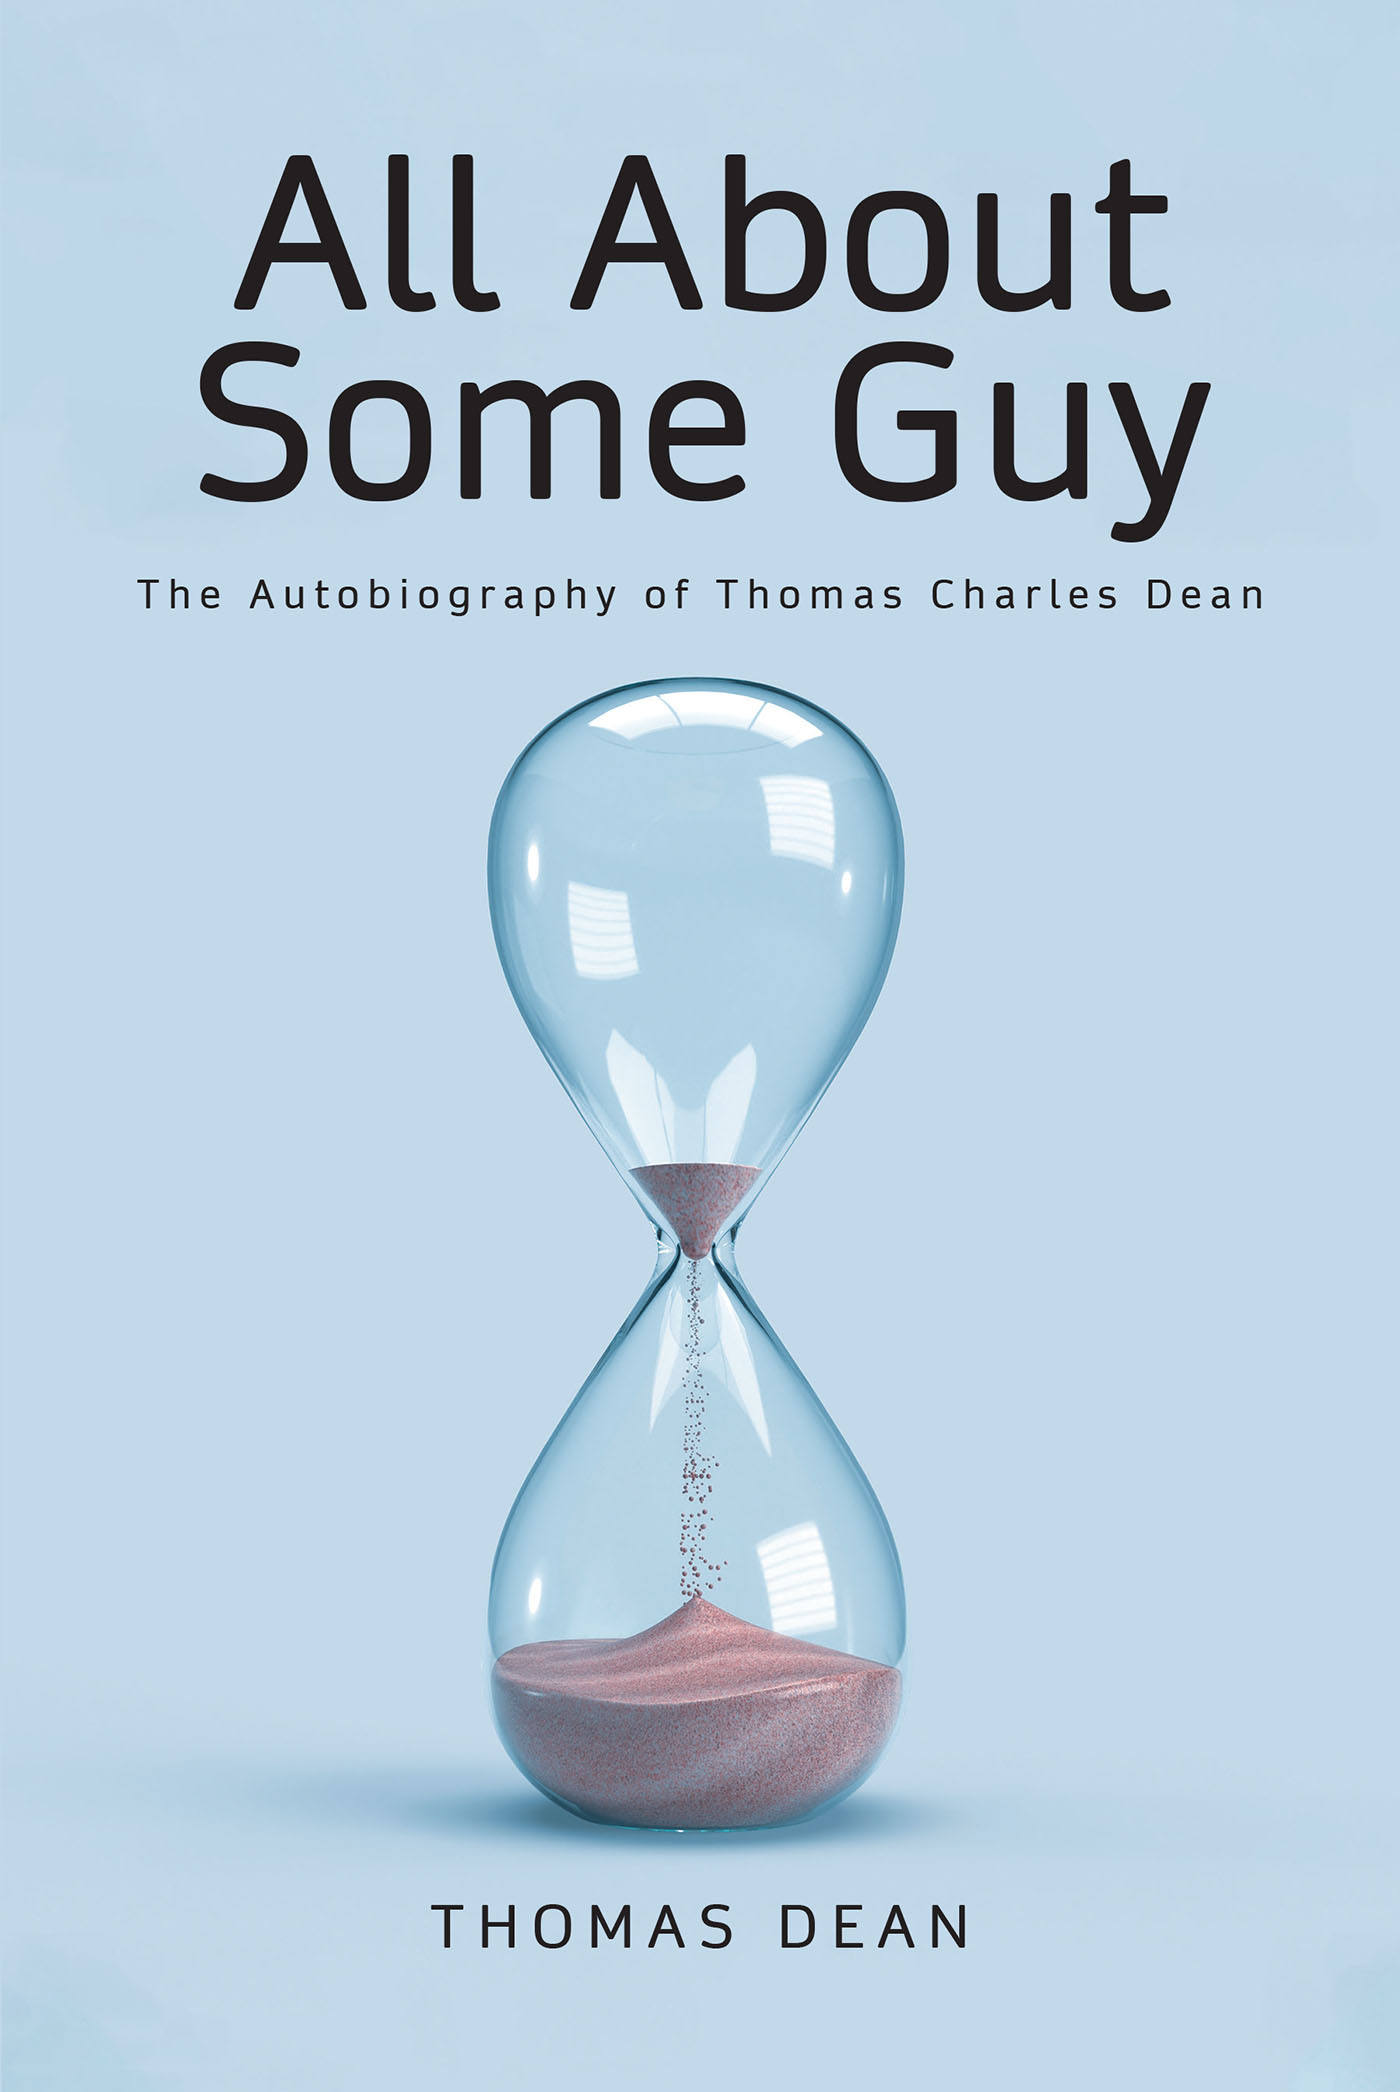 Thomas Dean’s New Book, "All About Some Guy: The Autobiography of Thomas Charles Dean," Follows the Author's Trials and Triumphs as He Reflects Upon a Life Well Lived